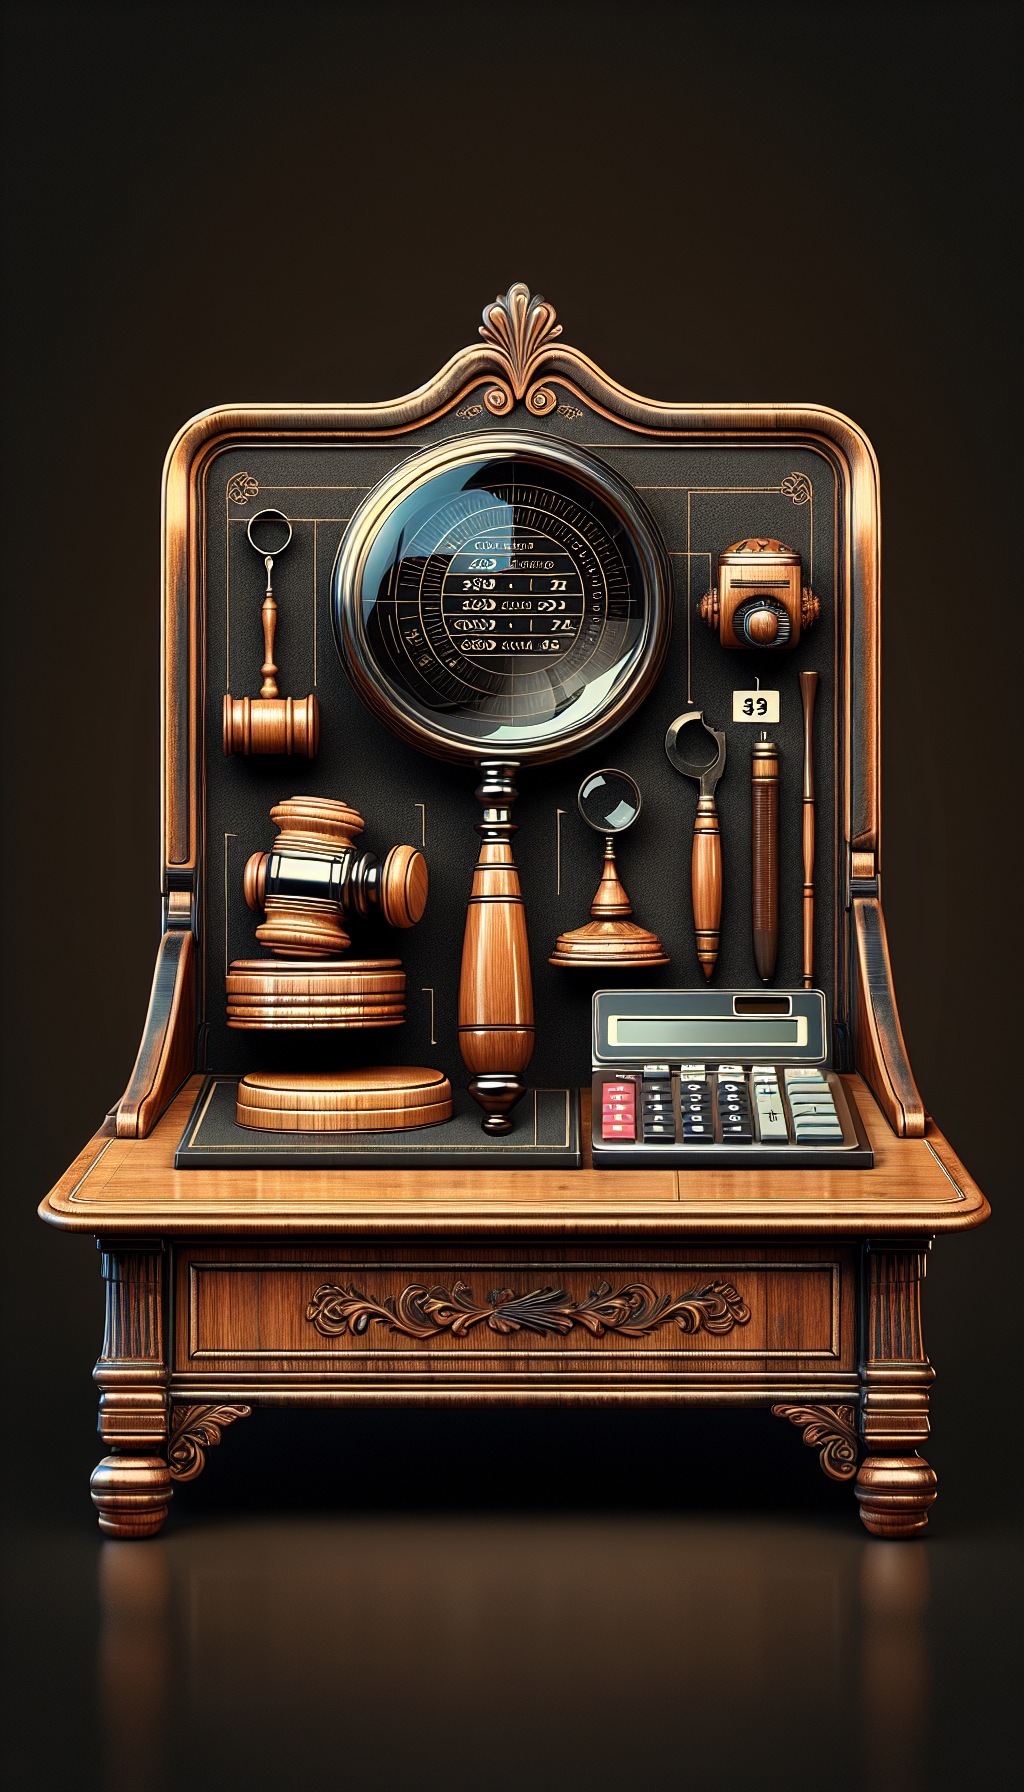 An illustration featuring a magnifying glass hovering above various elements like a calculator, an auctioneer's gavel, and a pricing tag, all laid out atop an elegant, vintage roll top desk with intricate woodwork. The magnifying glass reflects different valuation indicators like age, condition, and rarity, seamlessly blending Victorian flourishes with modern analytical imagery.